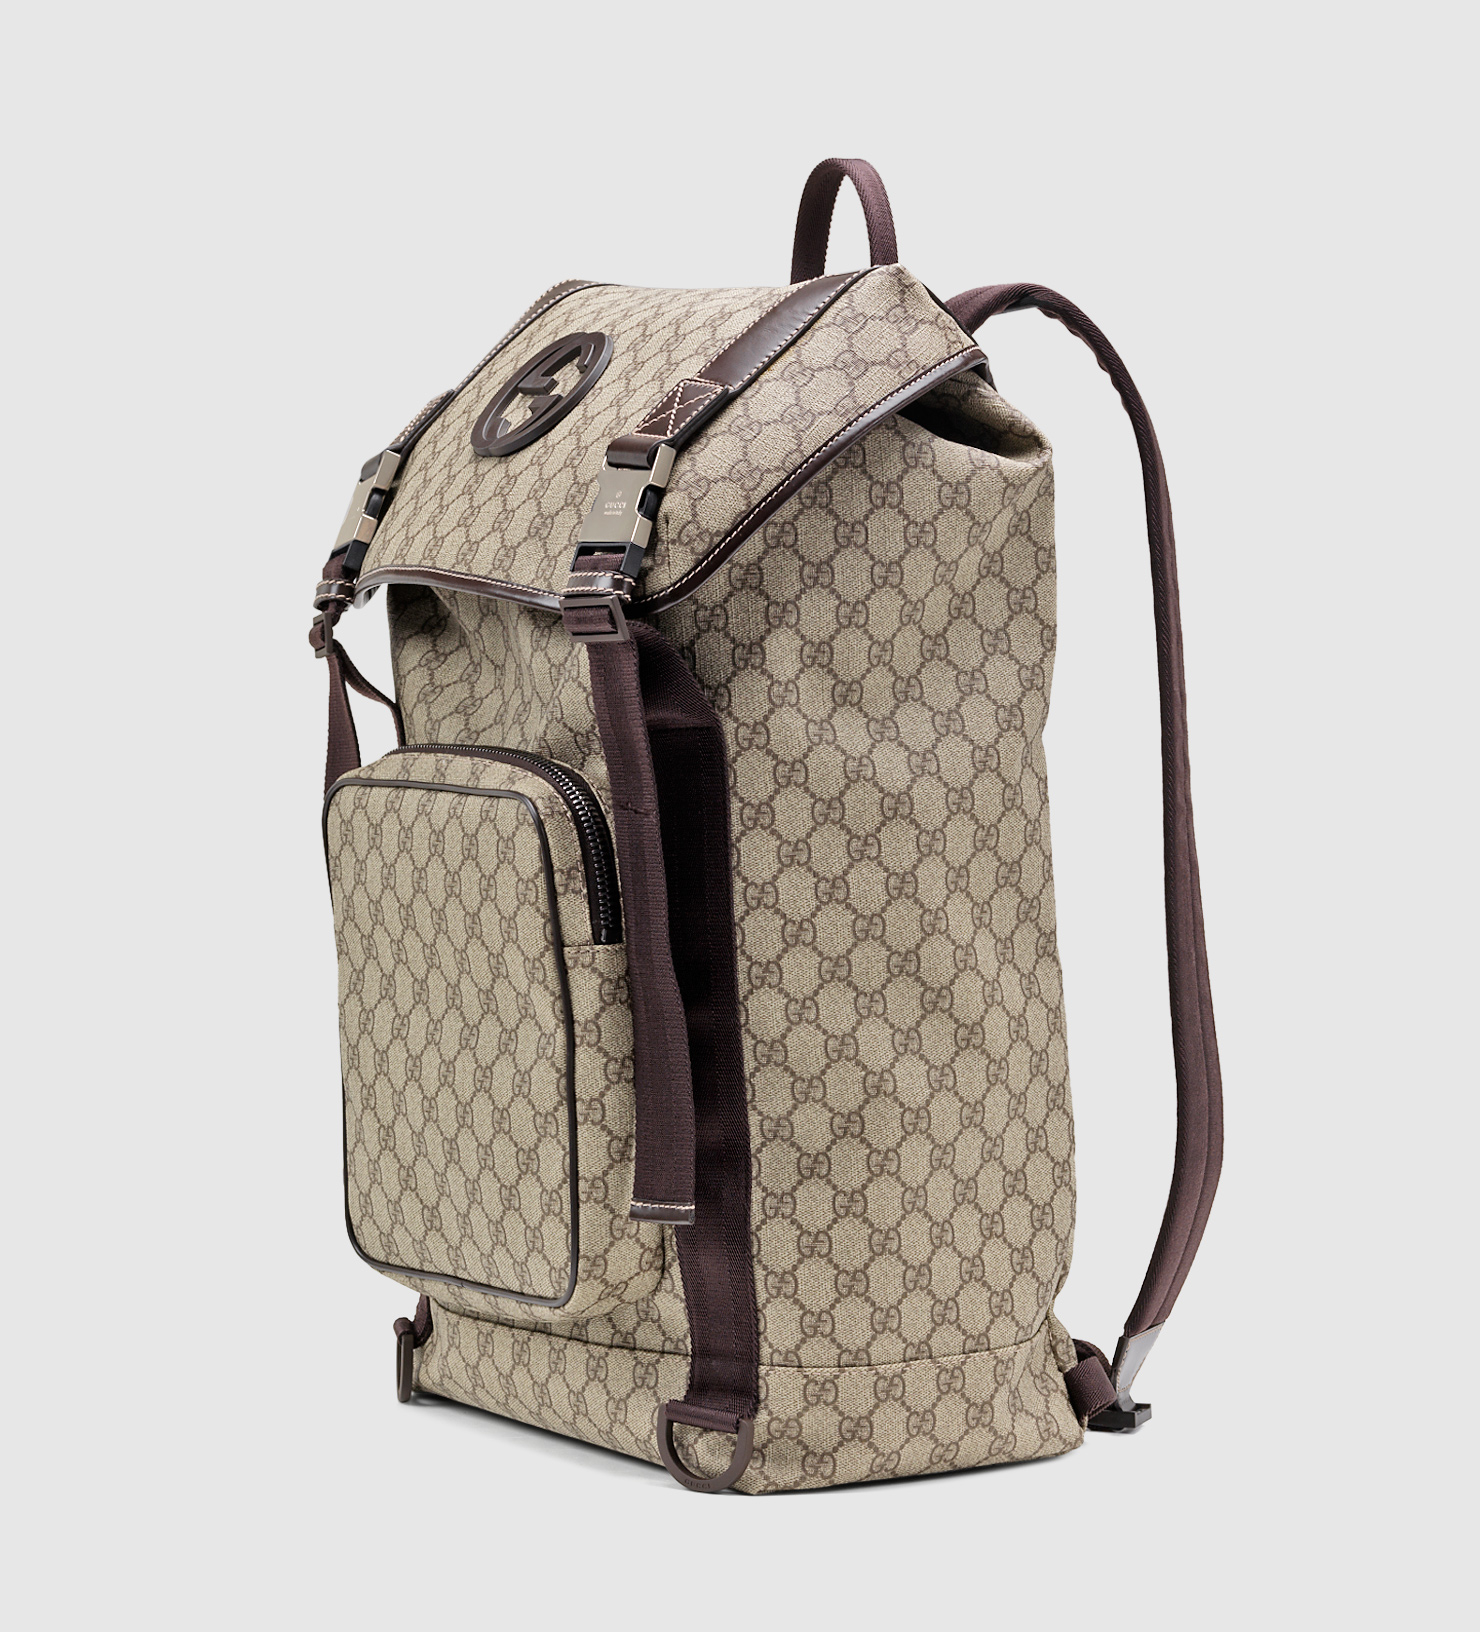 Gucci Gg Supreme Canvas Interlocking G Backpack in Natural for Men | Lyst